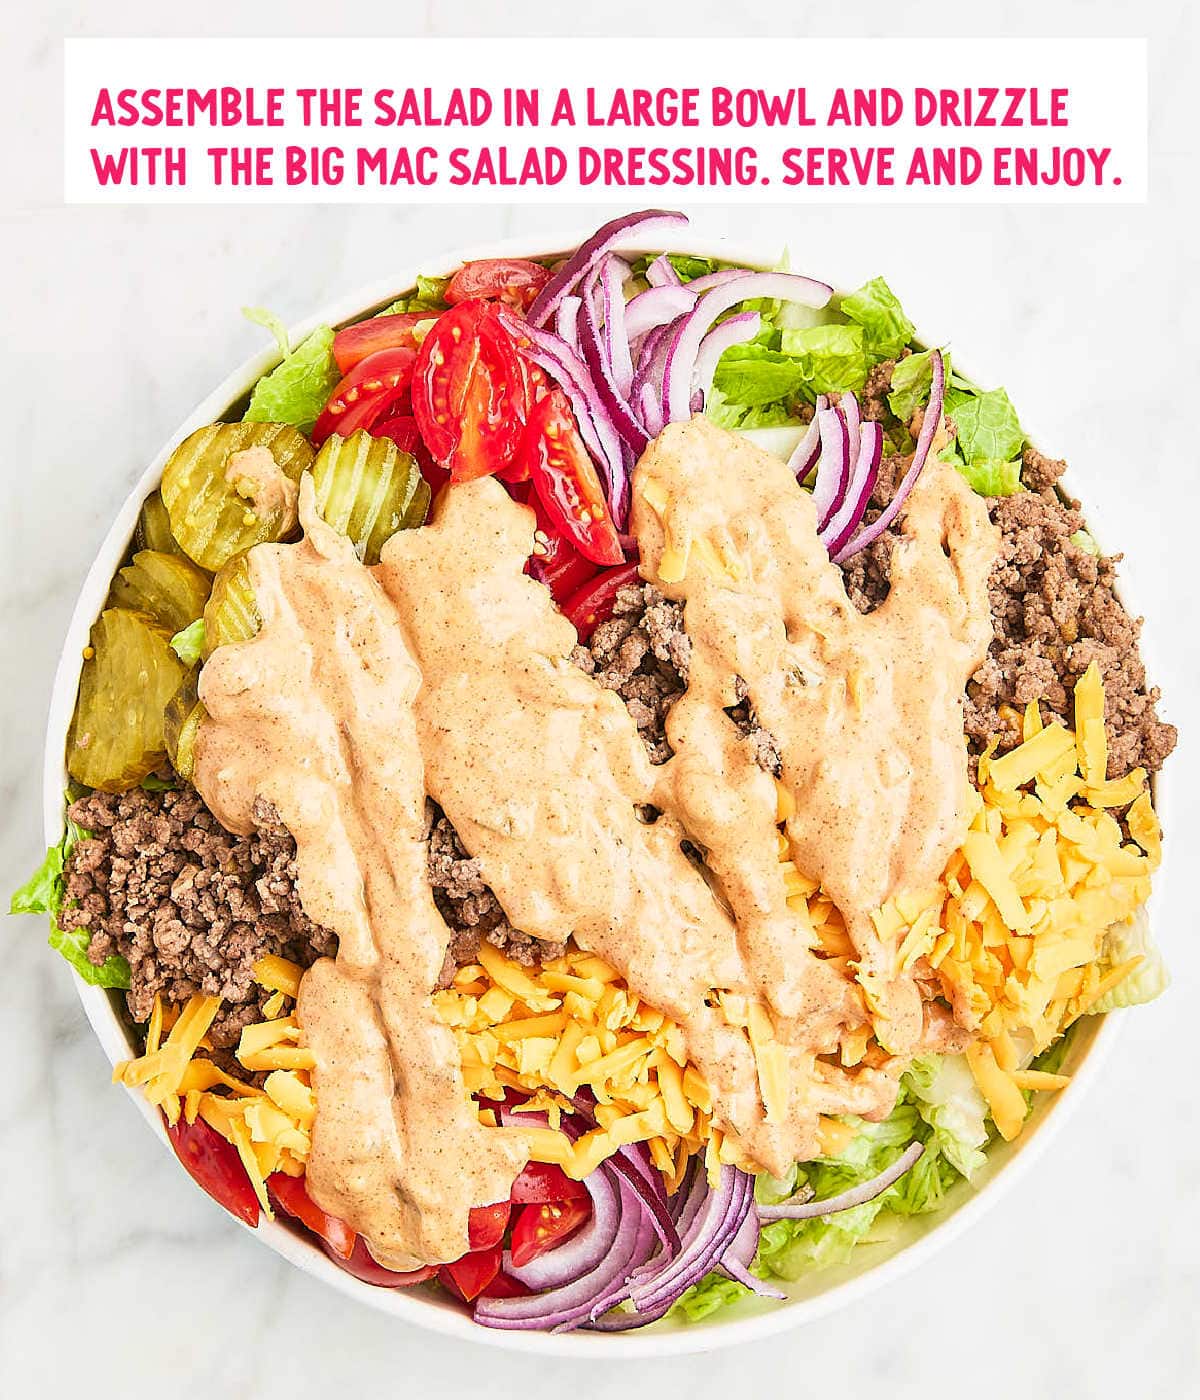 Image of the assembled salad with the drizzled Big Mac Salad Dressing.